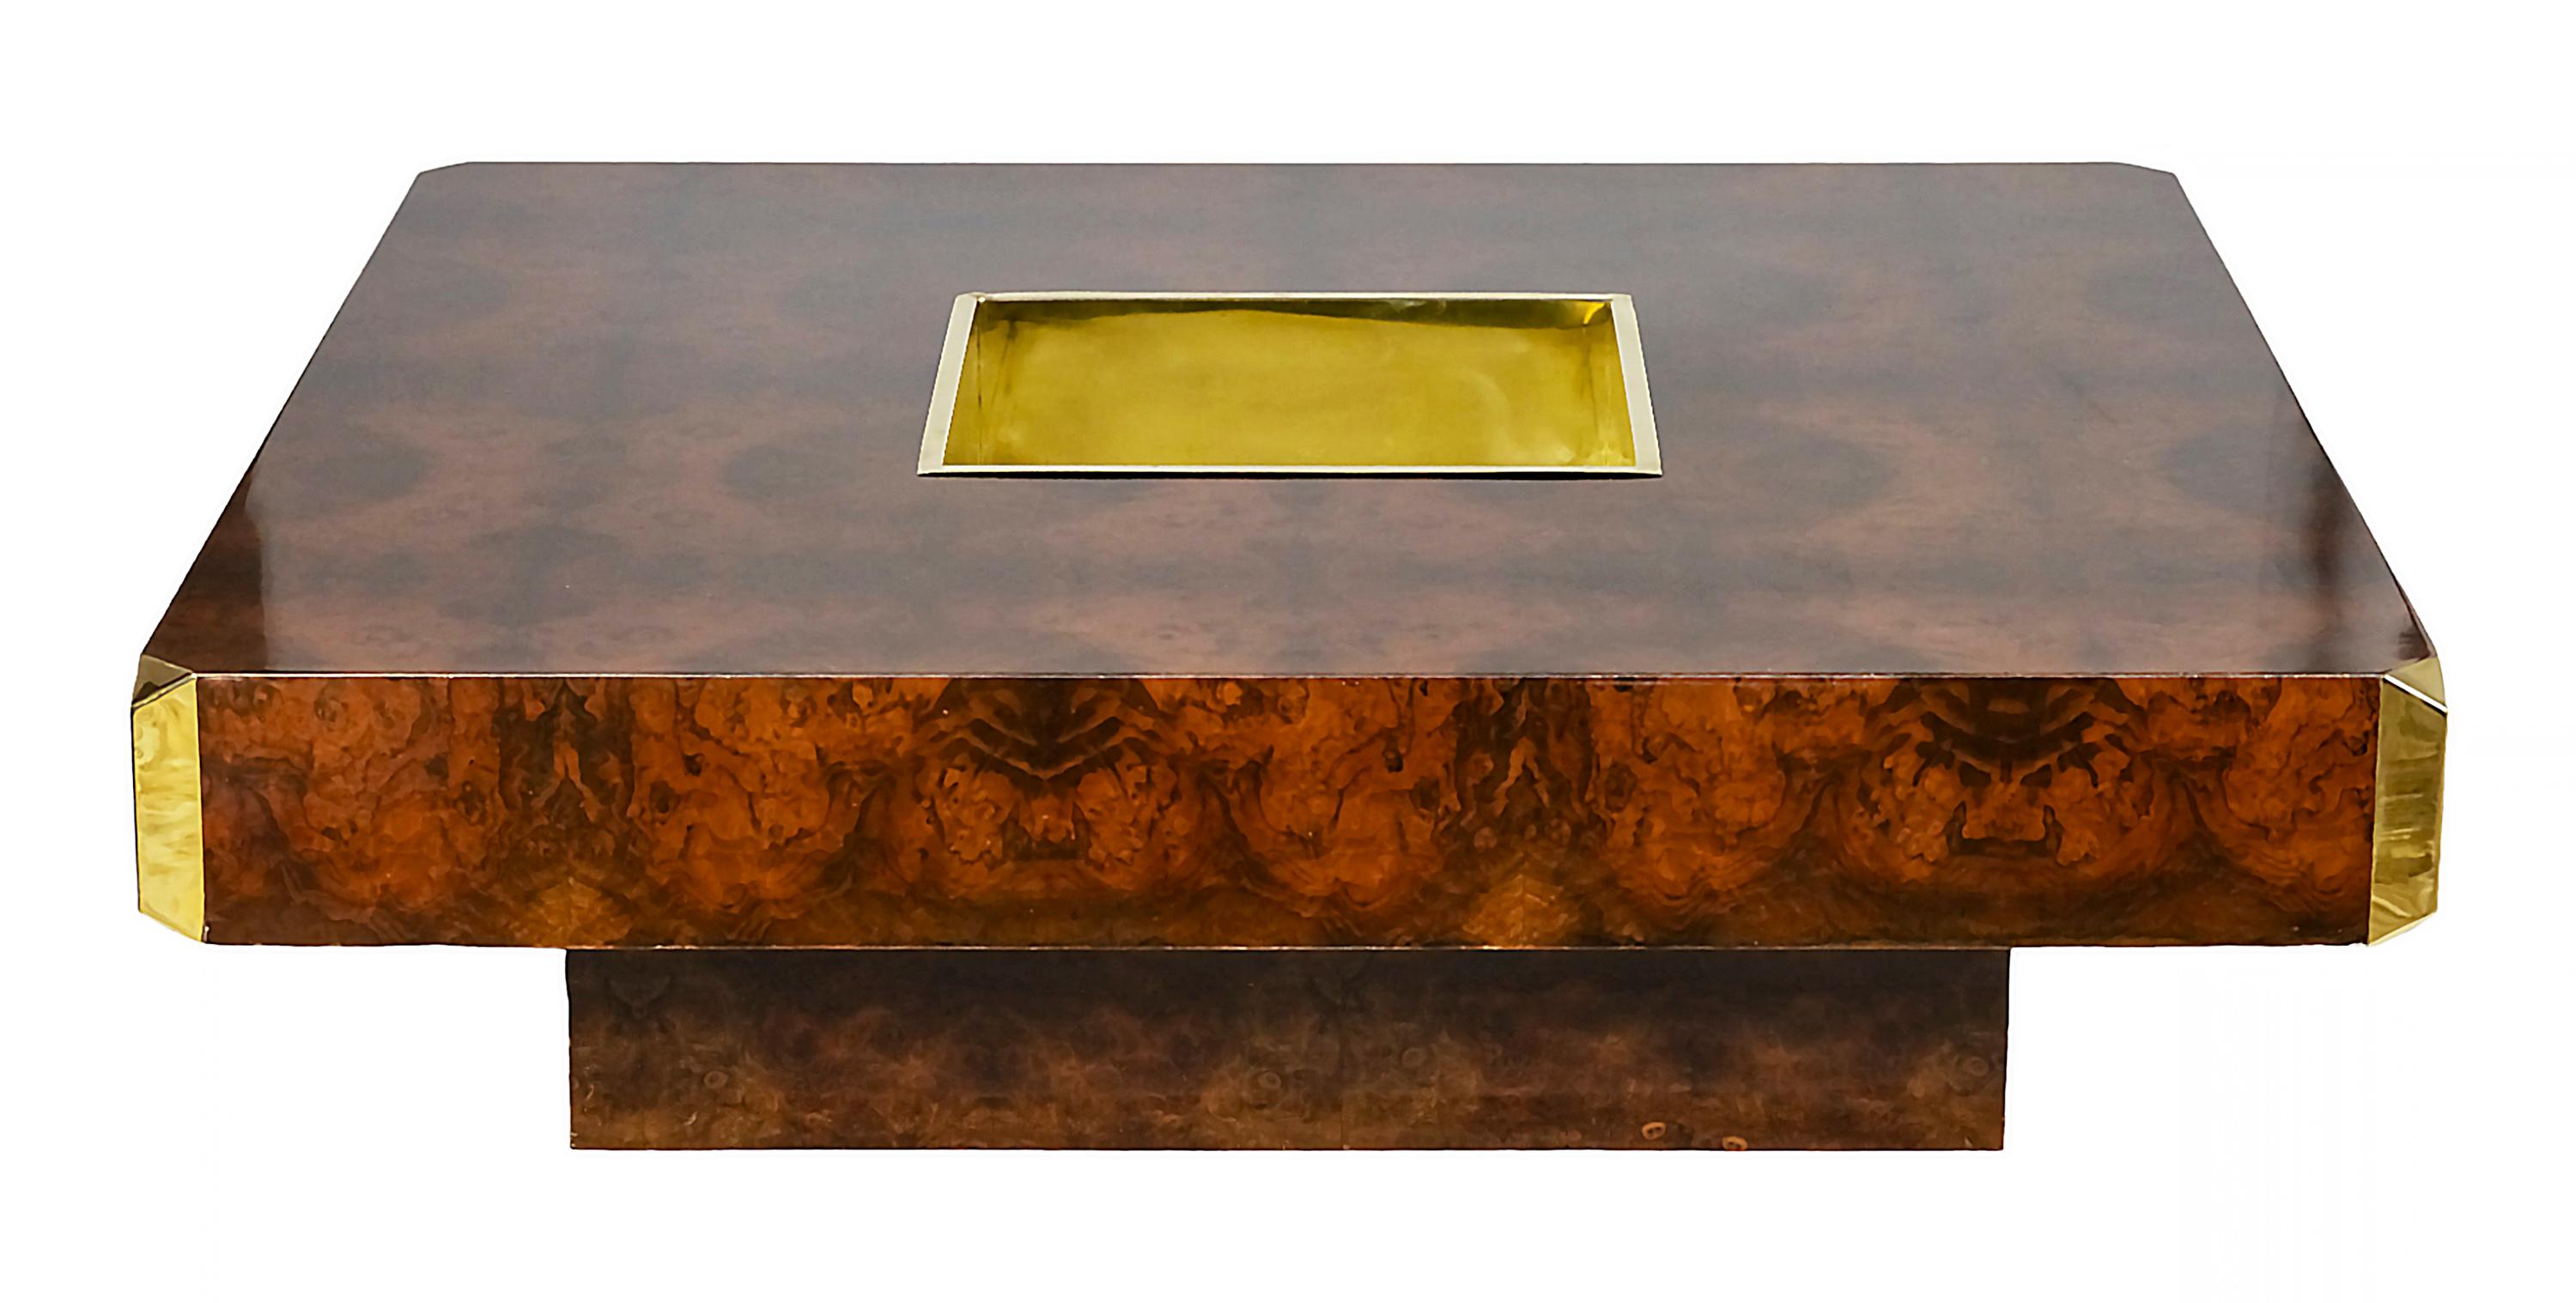 Italian Willy Rizzo ALVEO series mid-century coffee table from 1970s. 
This table is an exclusive piece created with burl walnut veneer decorated with brass details on the corners and central brass element for bar purpose.
Very good vintage